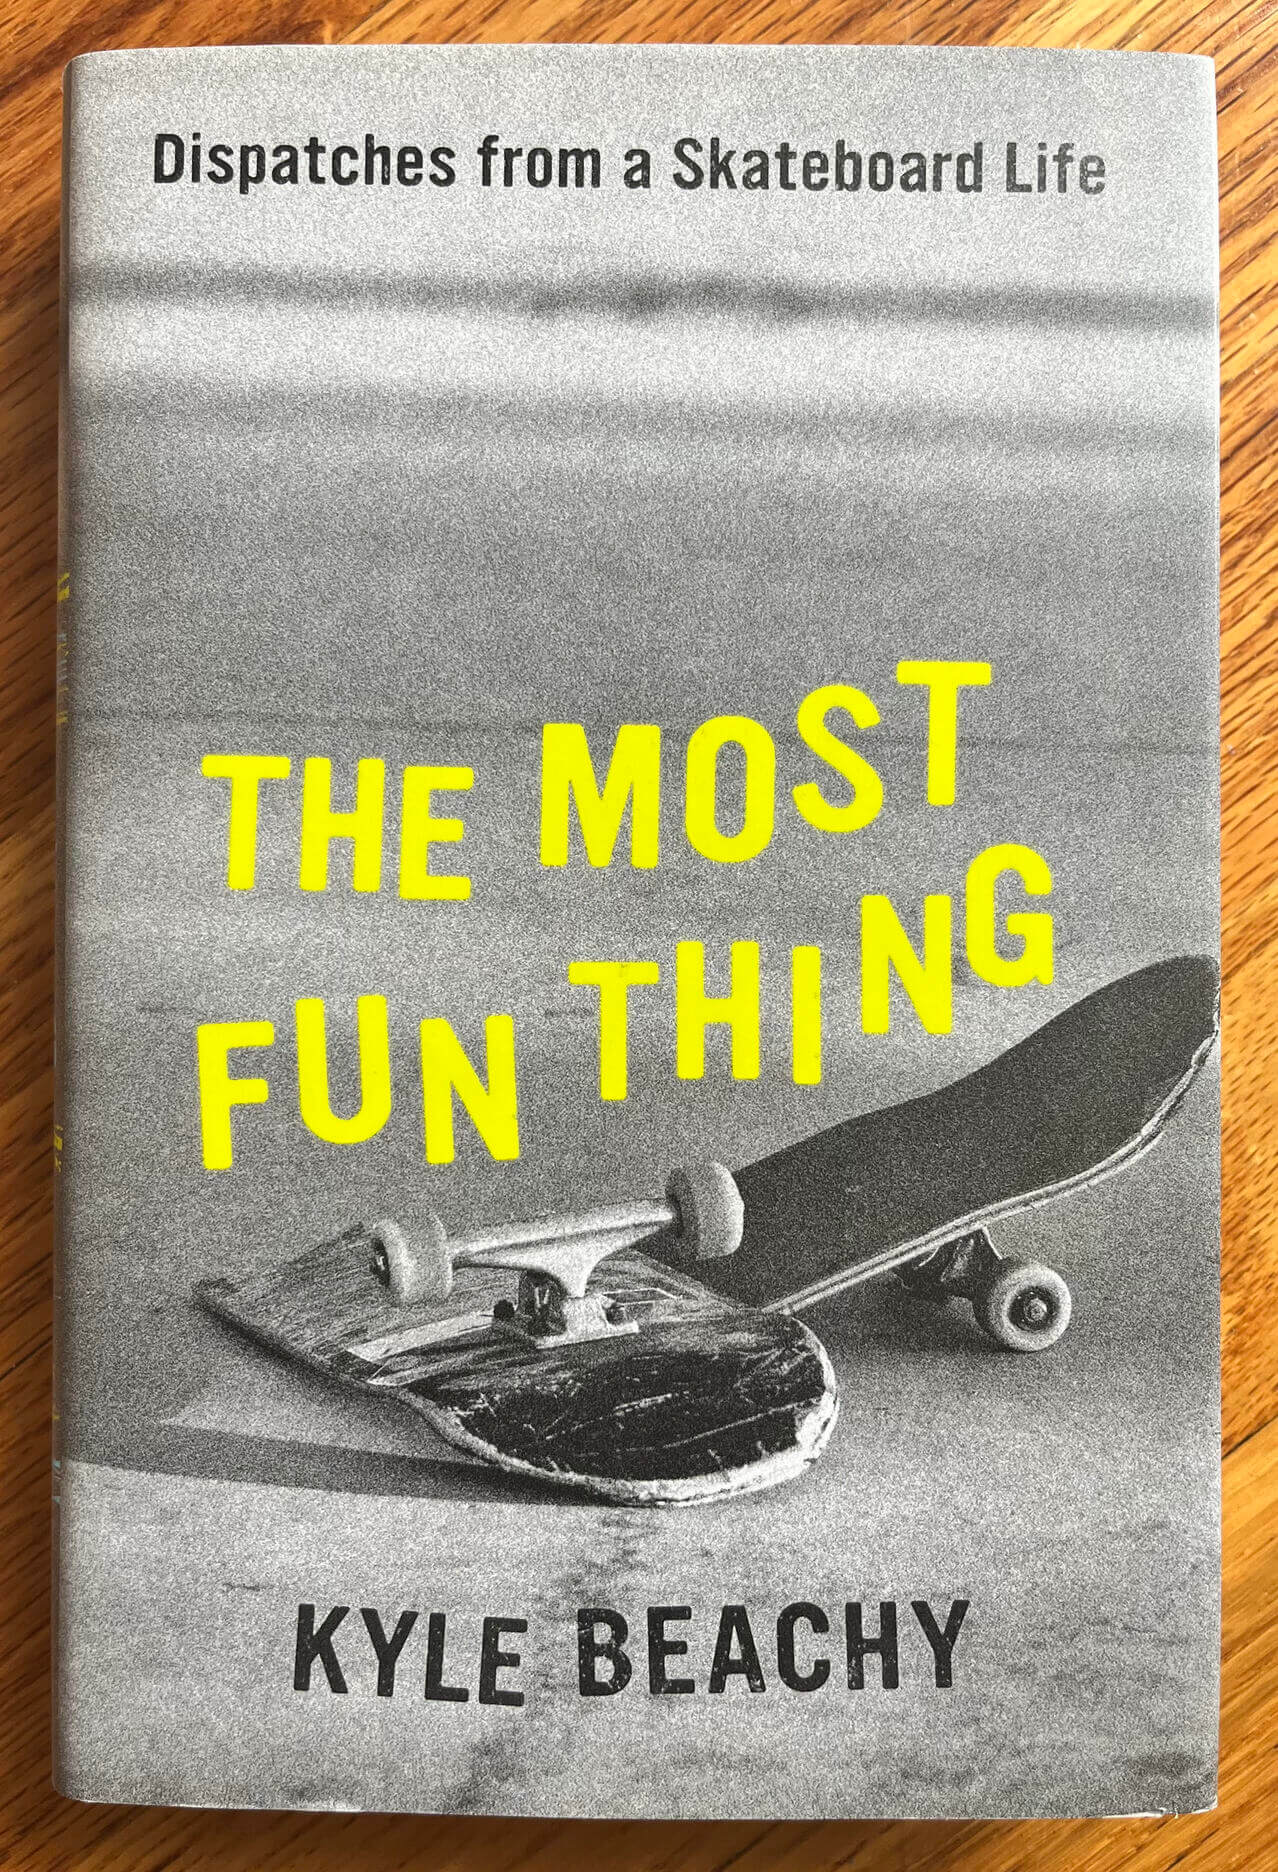 “The Most Fun Thing: Dispatches from a Skateboard Life” by Kyle Beachy.